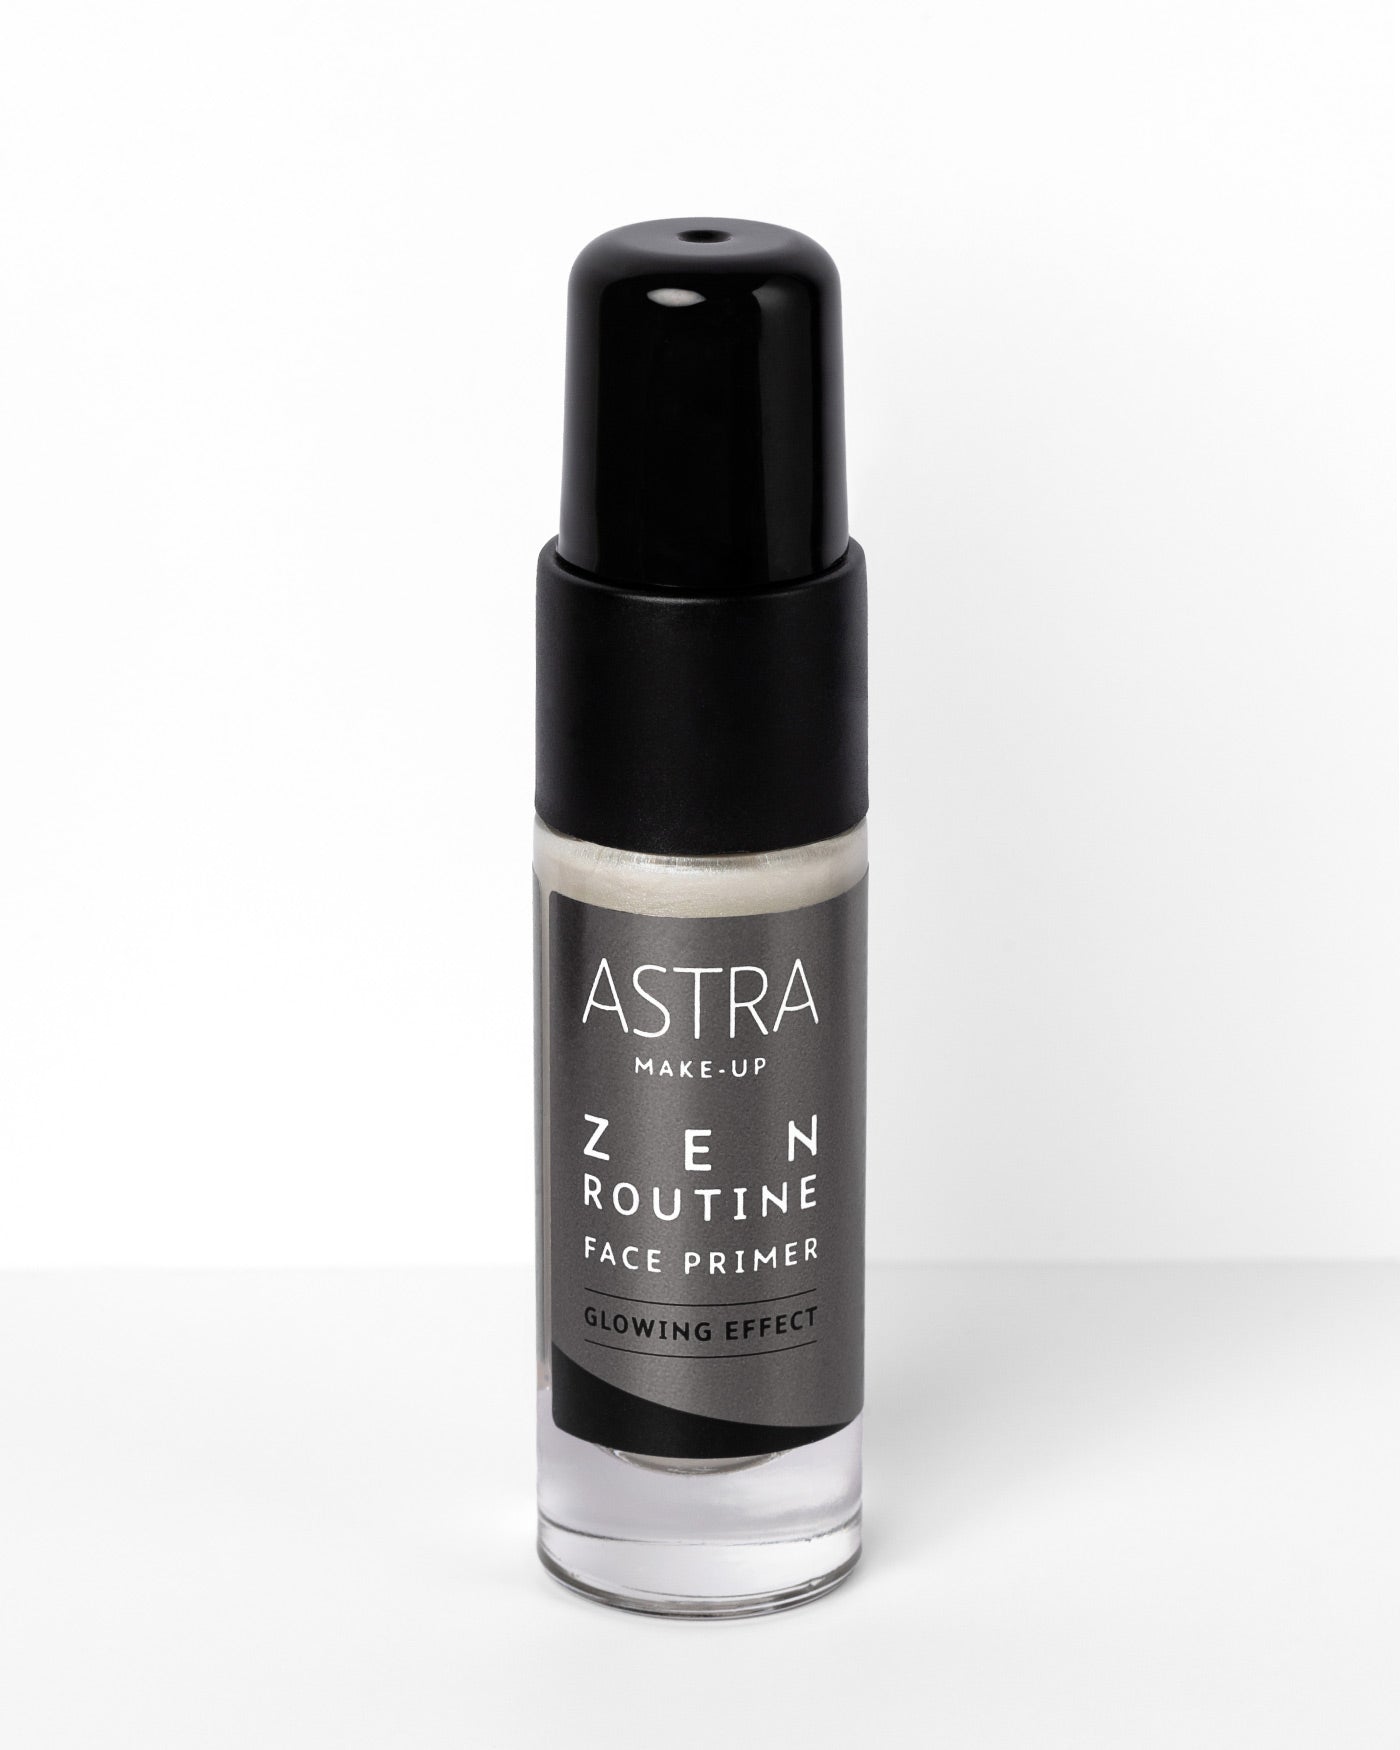 ZEN ROUTINE FACE PRIMER GLOWING EFFECT - Highlighter - Astra Make-Up